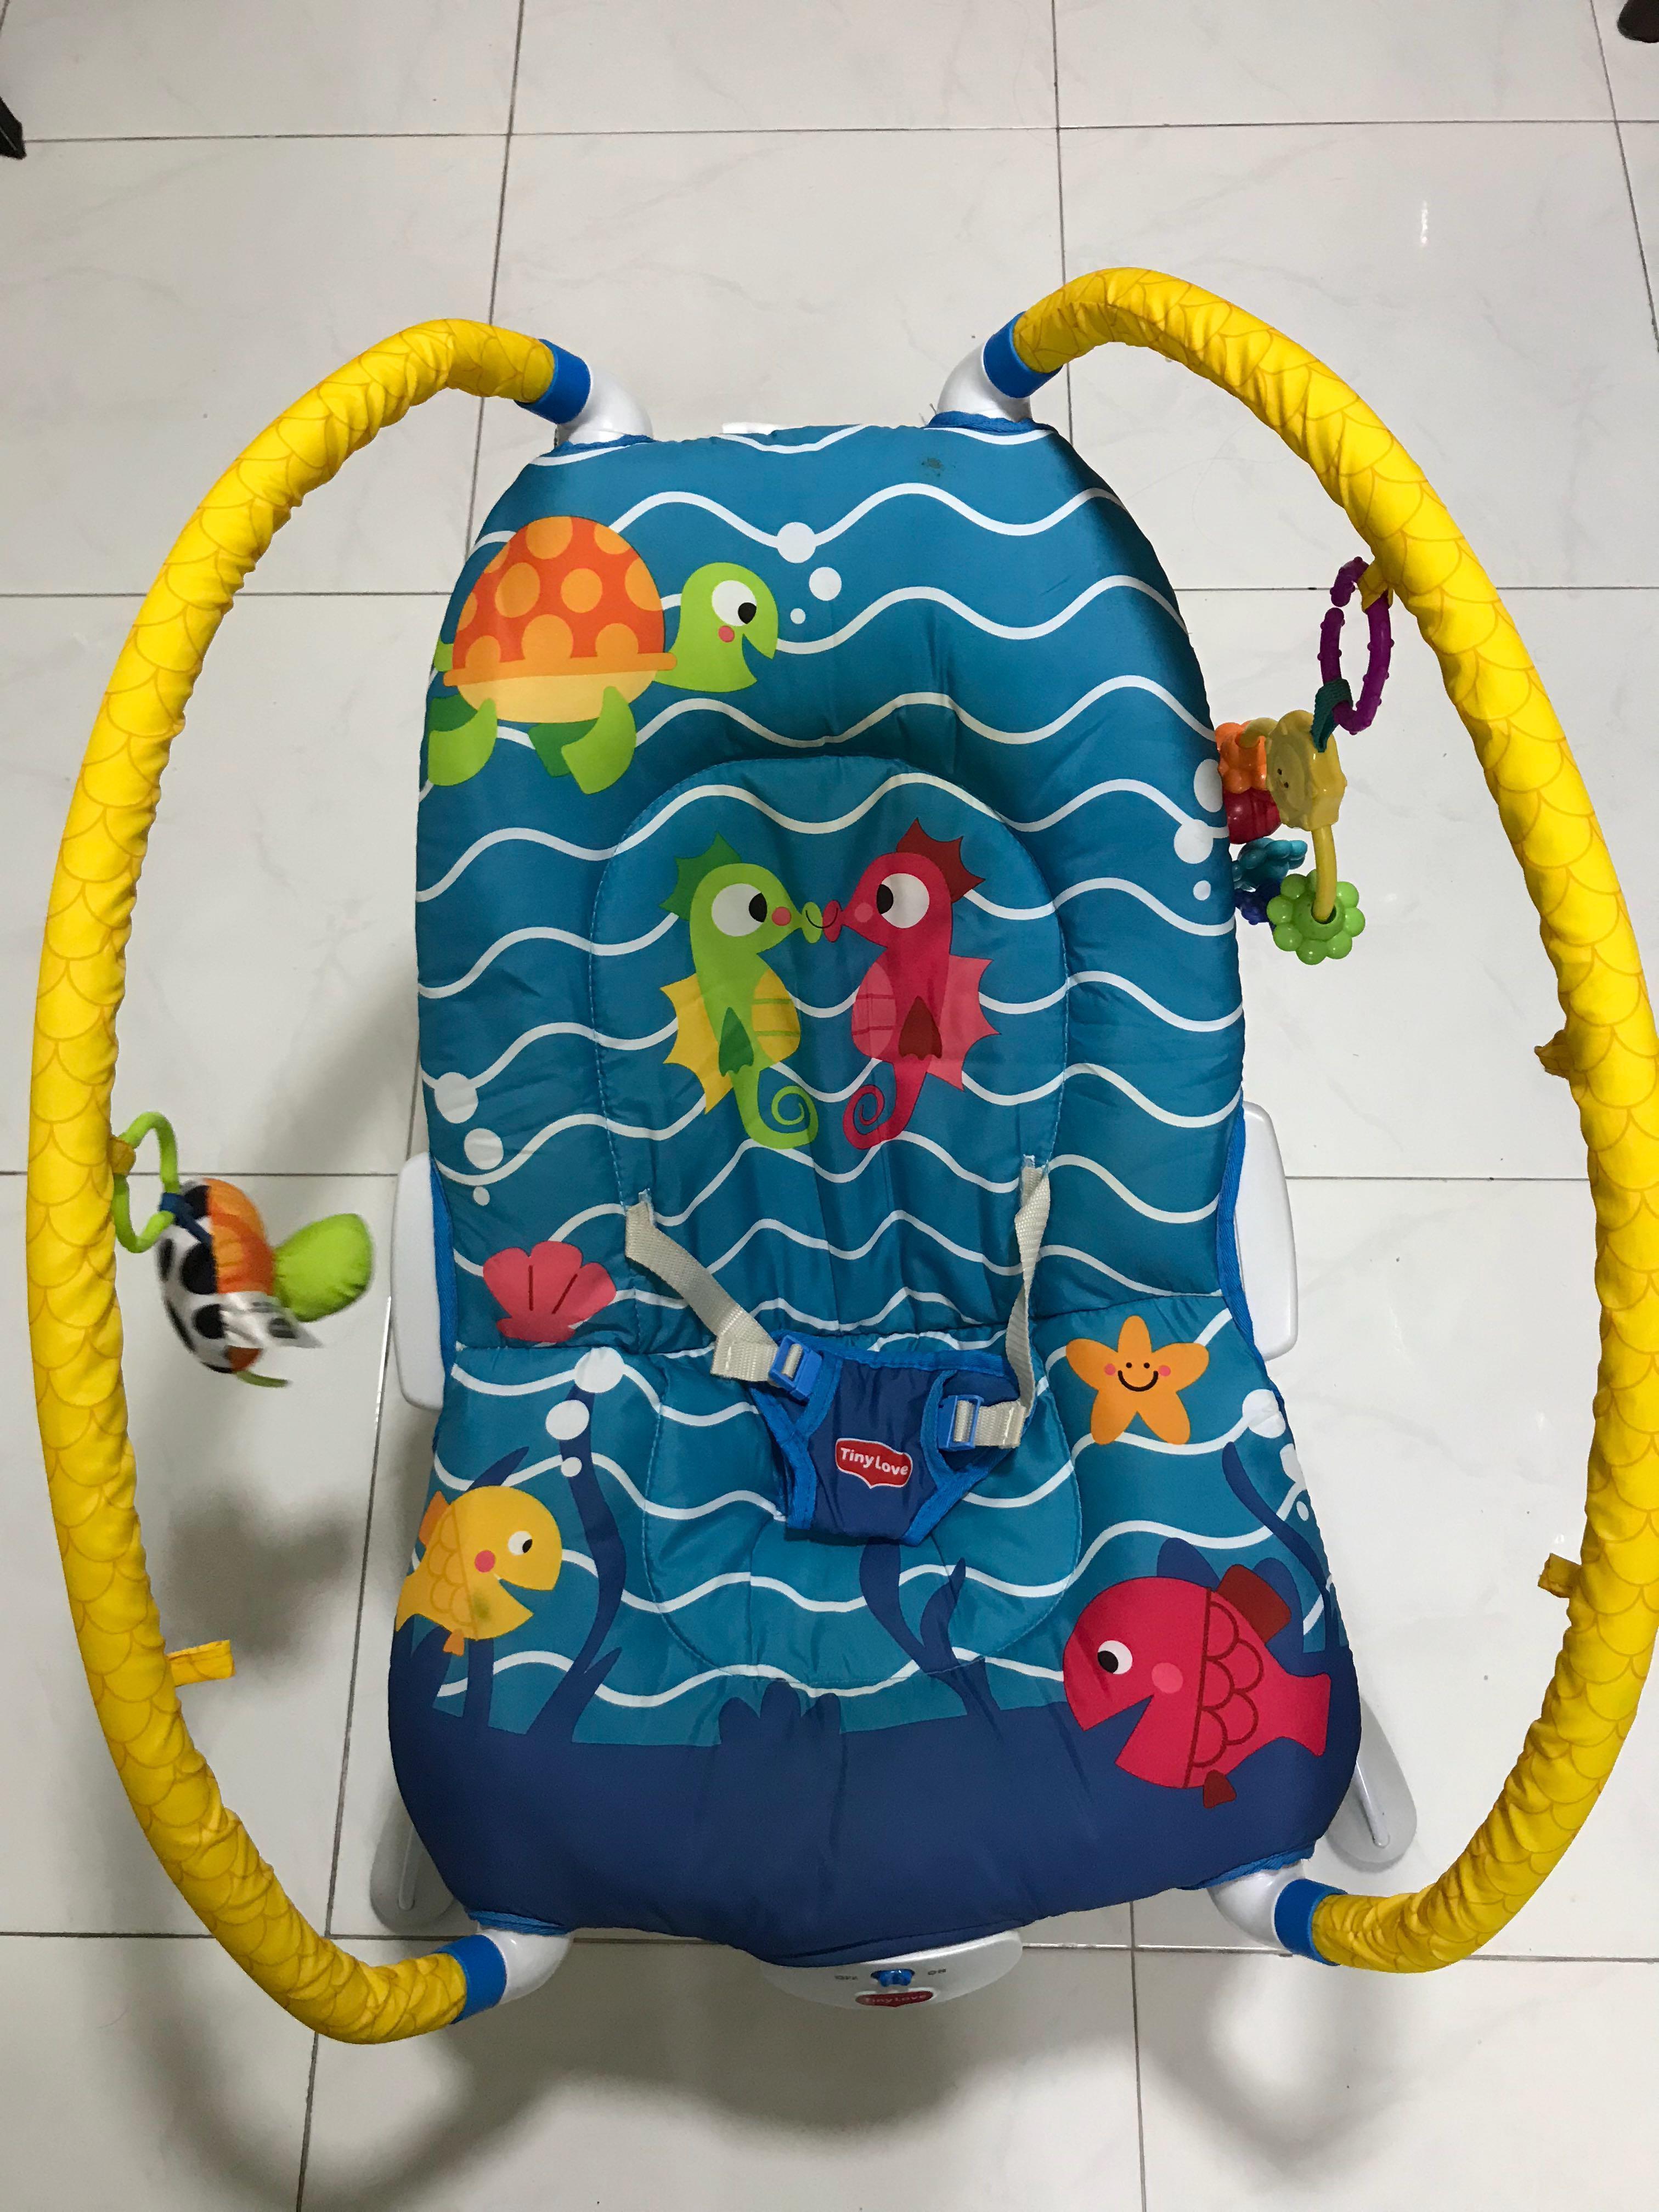 under the sea bouncer